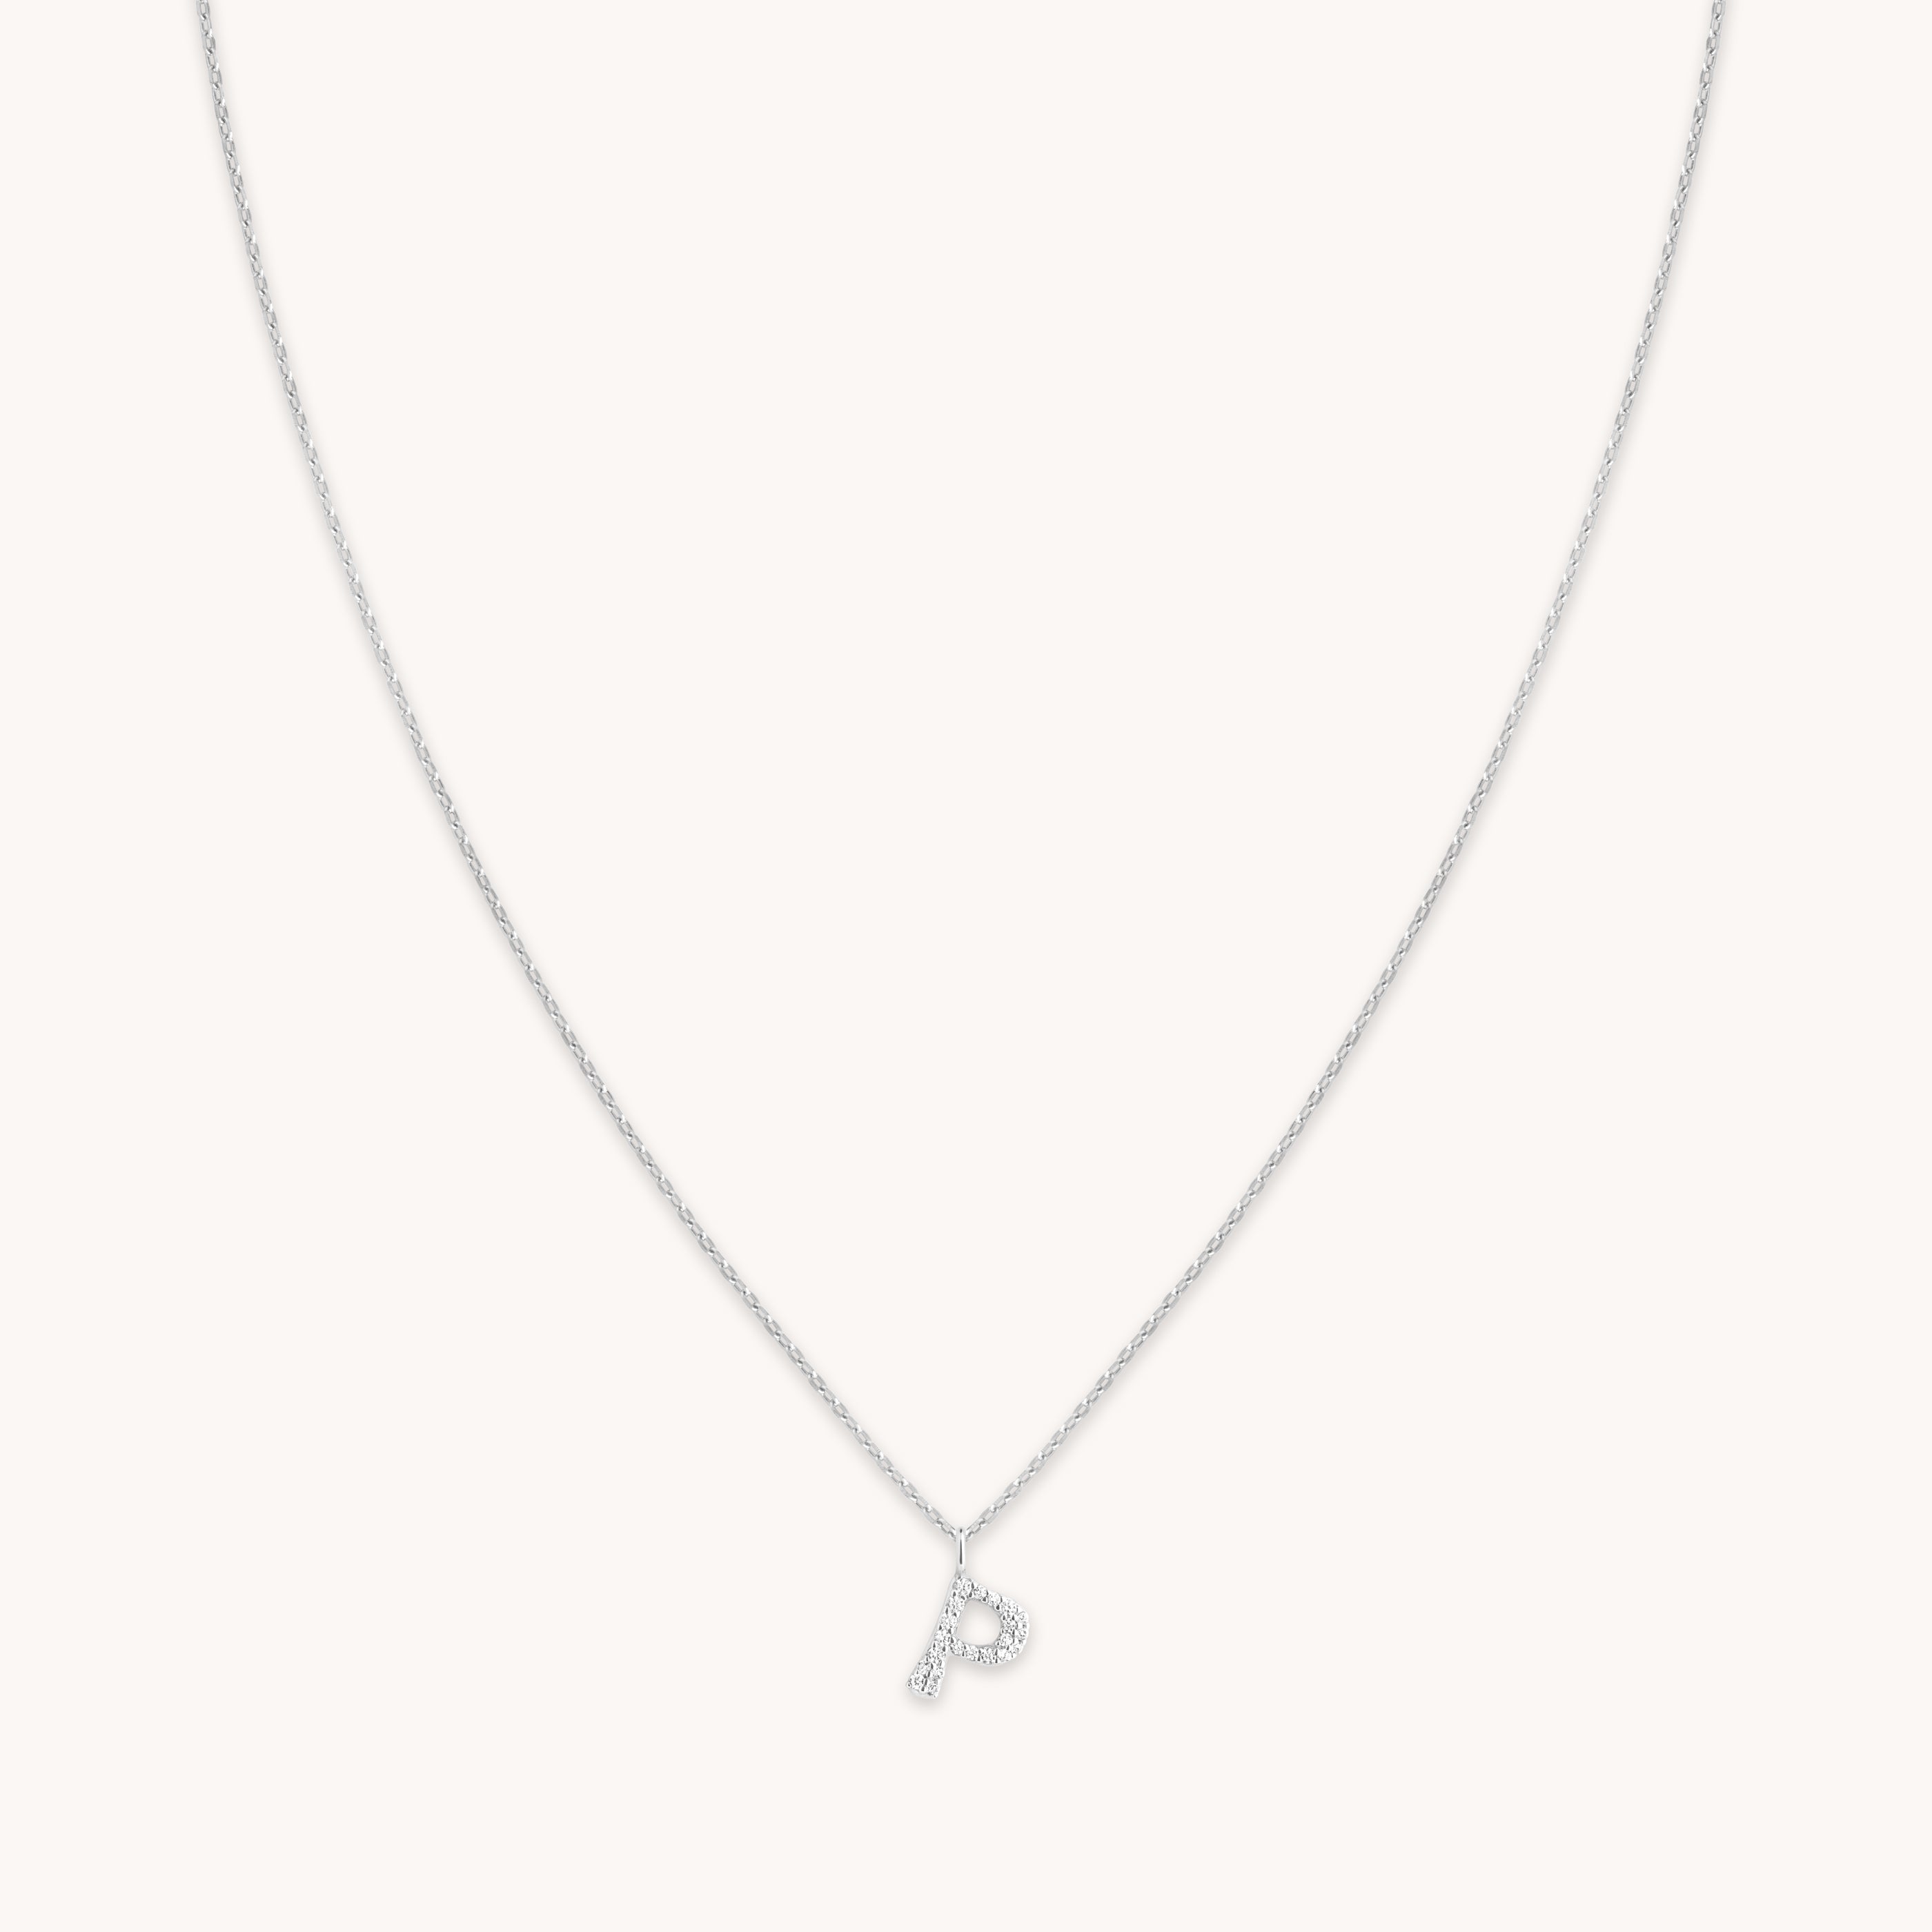 P Initial Pavé Pendant Necklace in Silver